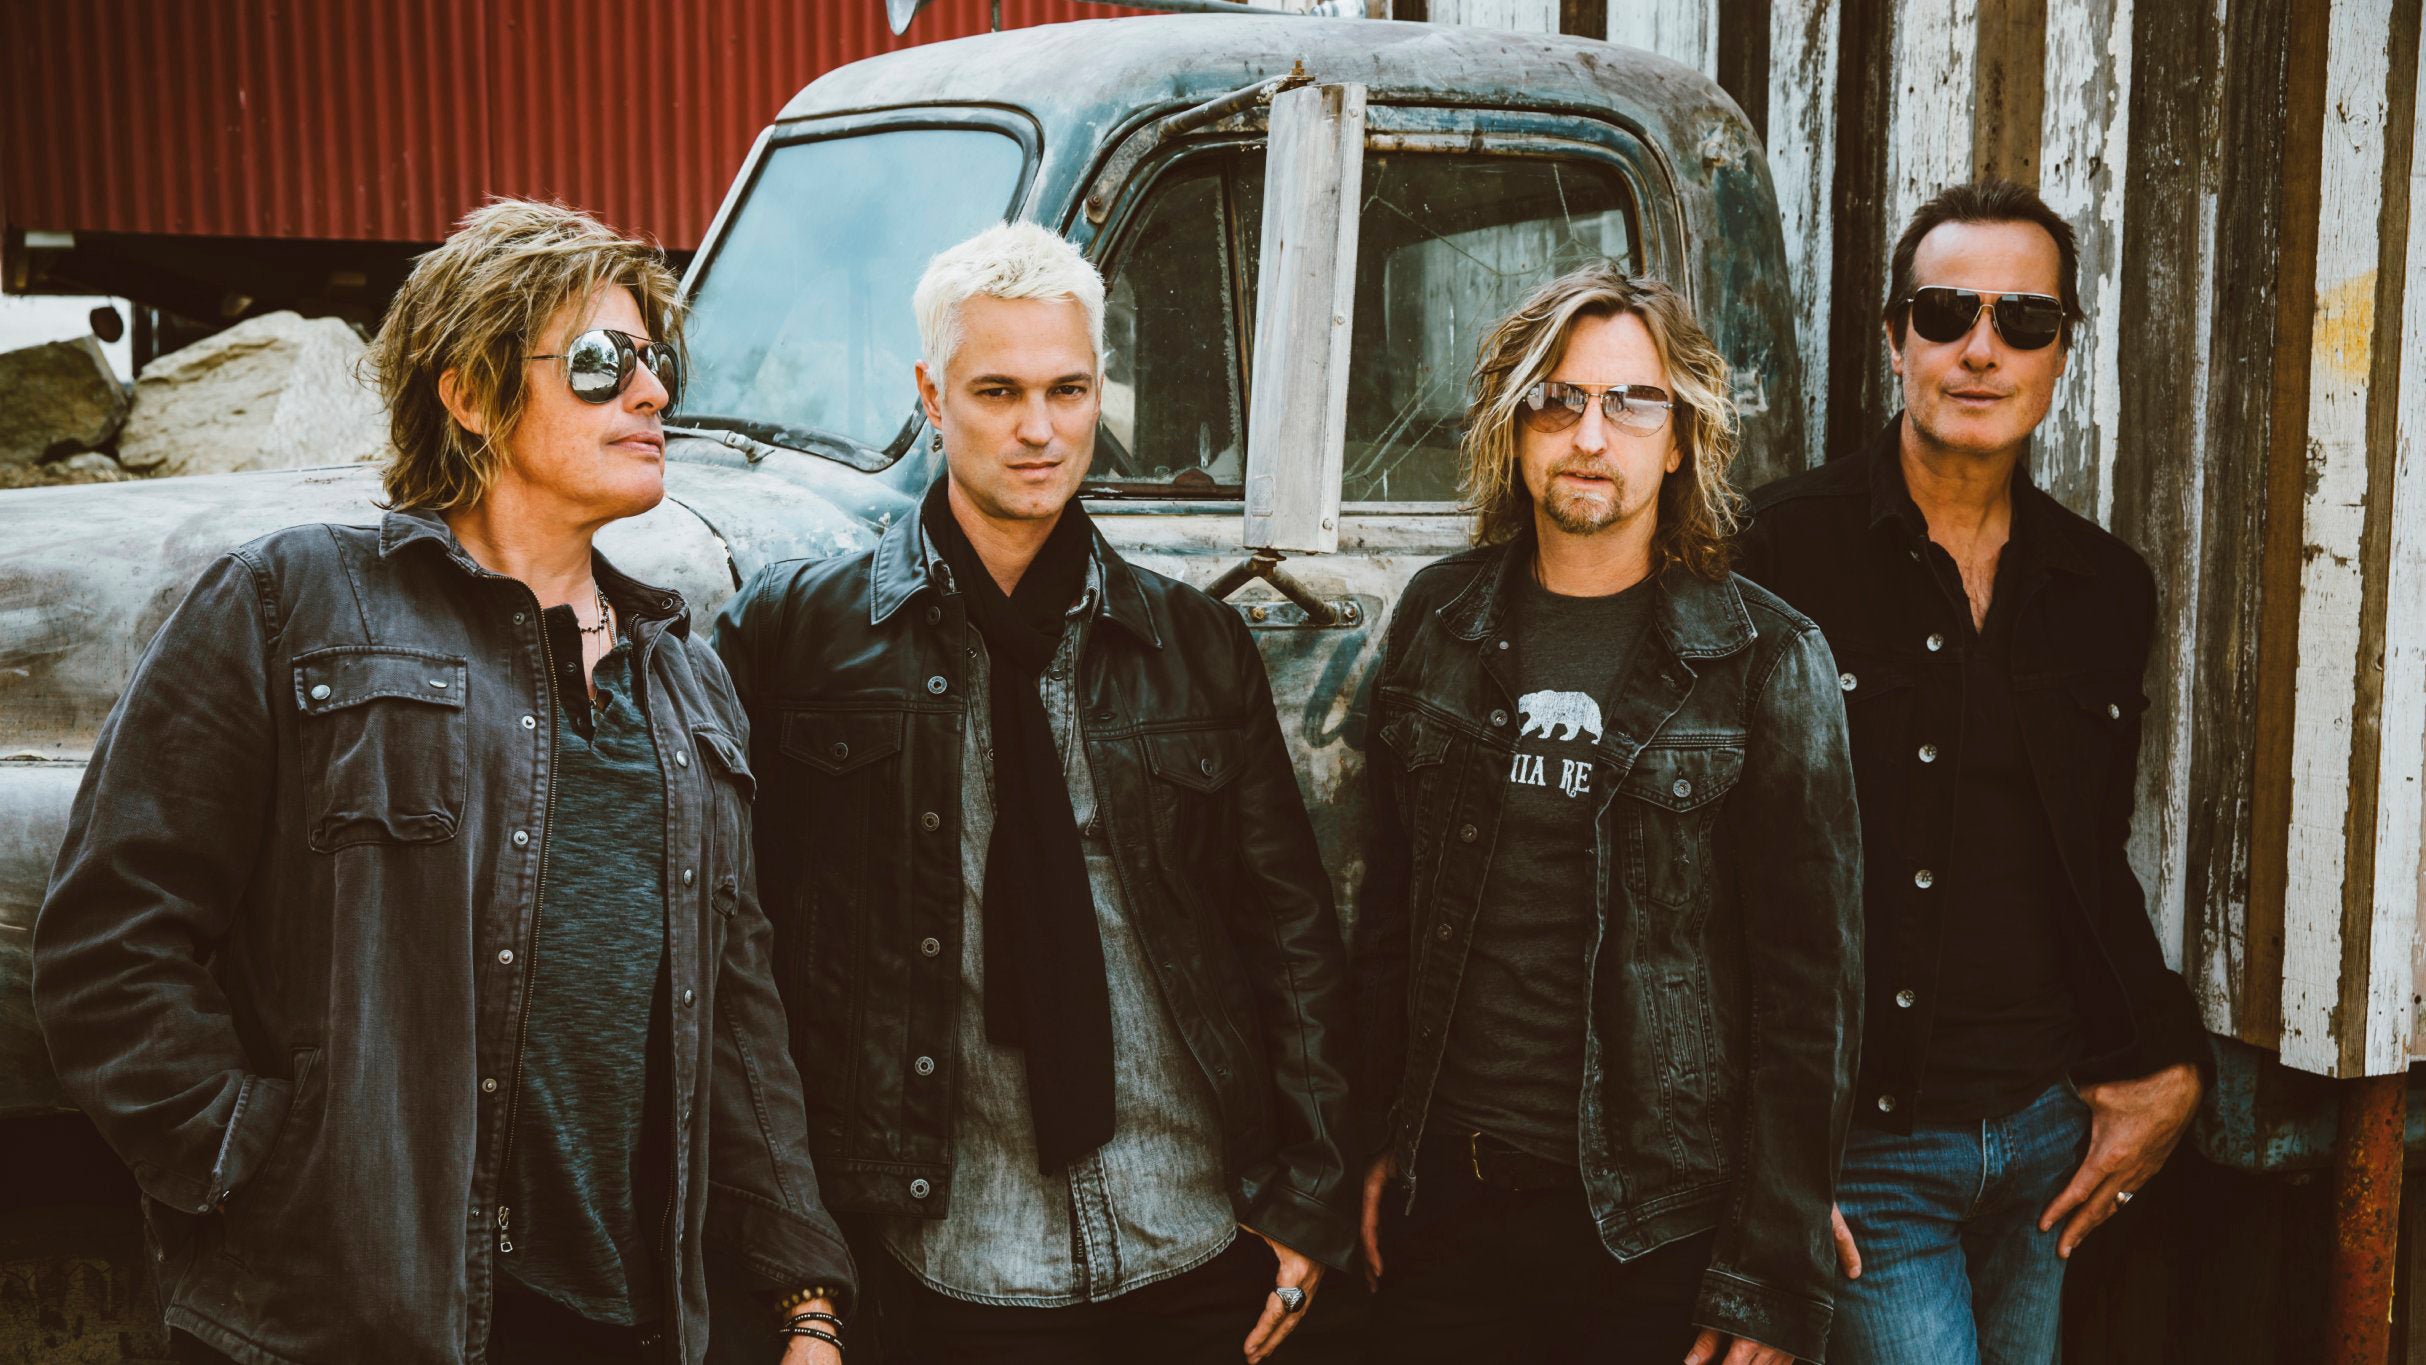 Stone Temple Pilots & +LIVE+ - The Jubilee Tour presale code for show tickets in Dallas, TX (Dos Equis Pavilion)